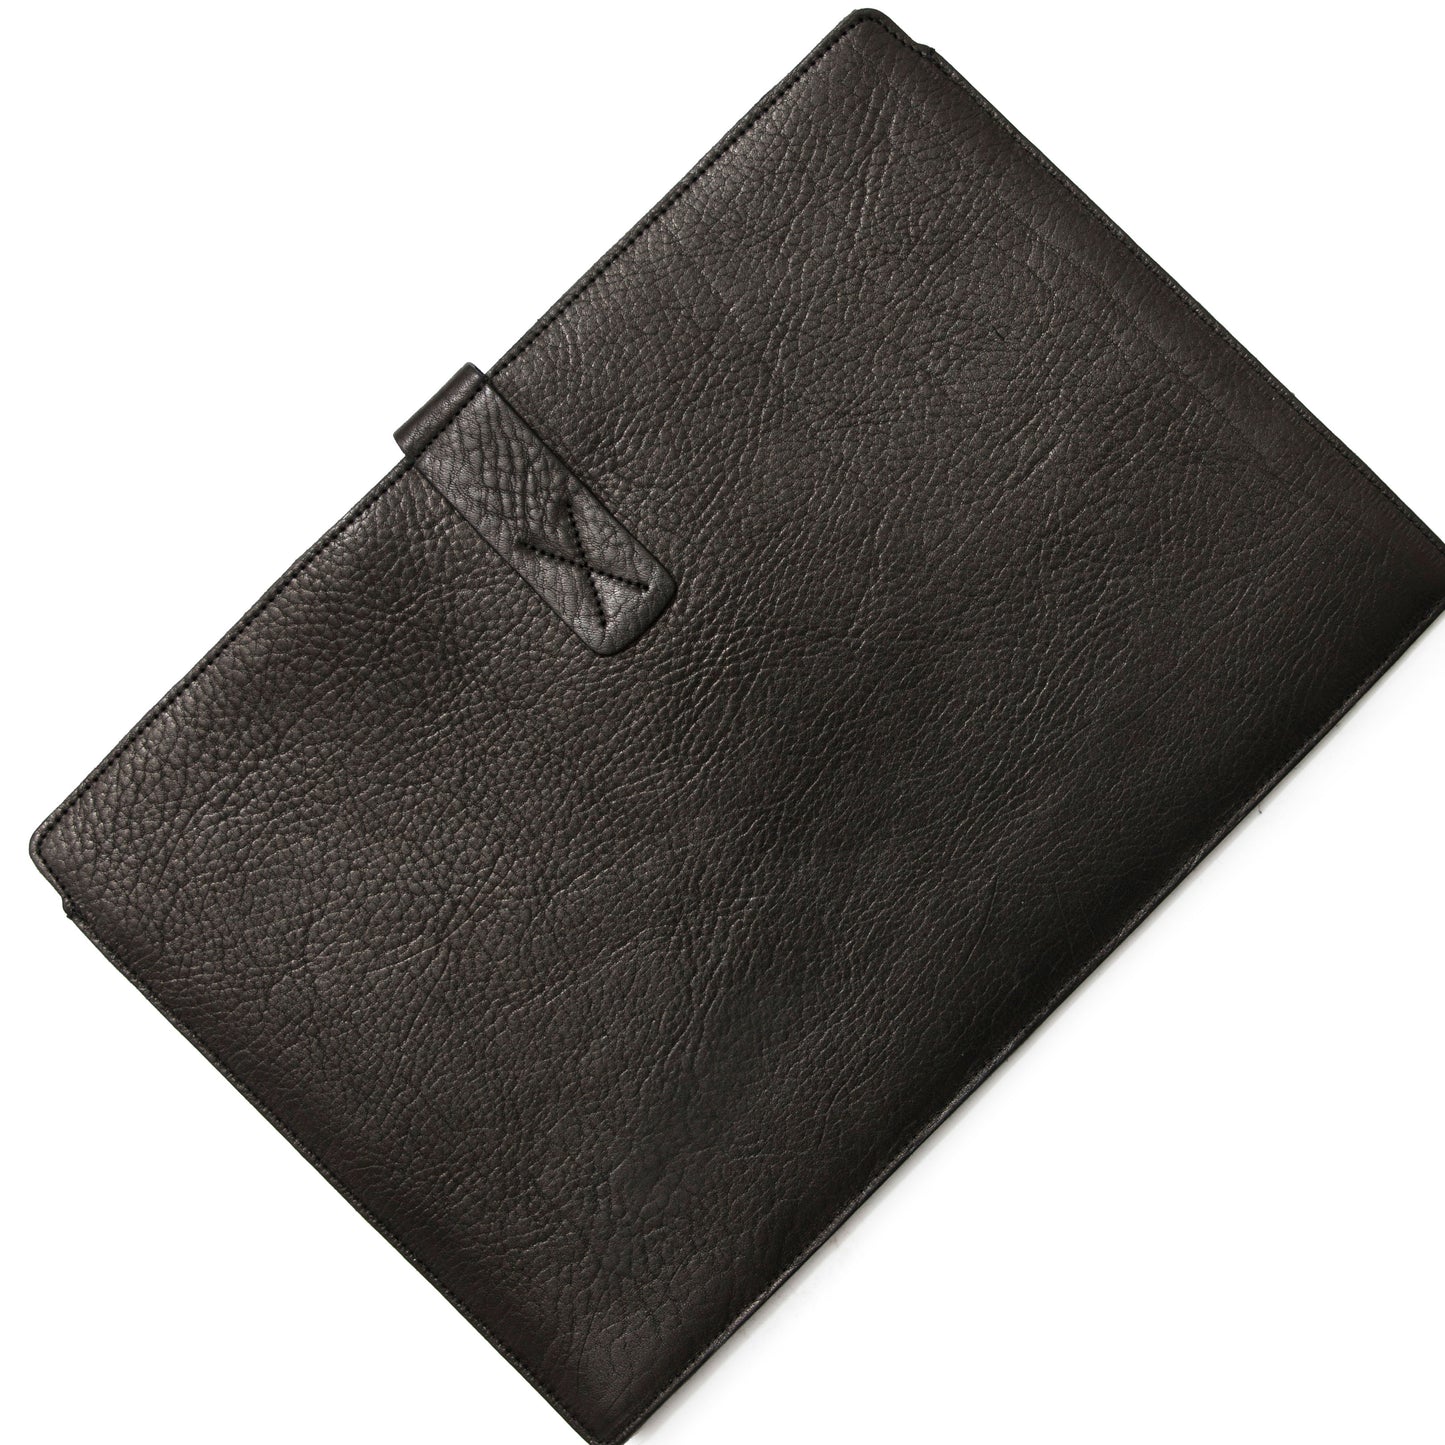 Luxurious Full-Grain Genuine vegetable-tanned Leather/Felt Sleeve for MacBook Air 13"M1/M2/M3/Macbook Pro 14"M3/M1/M2/M3 Pro/iPad Pro 12,9"M2/Notebook, 1 magnetic Clasp.- 1008